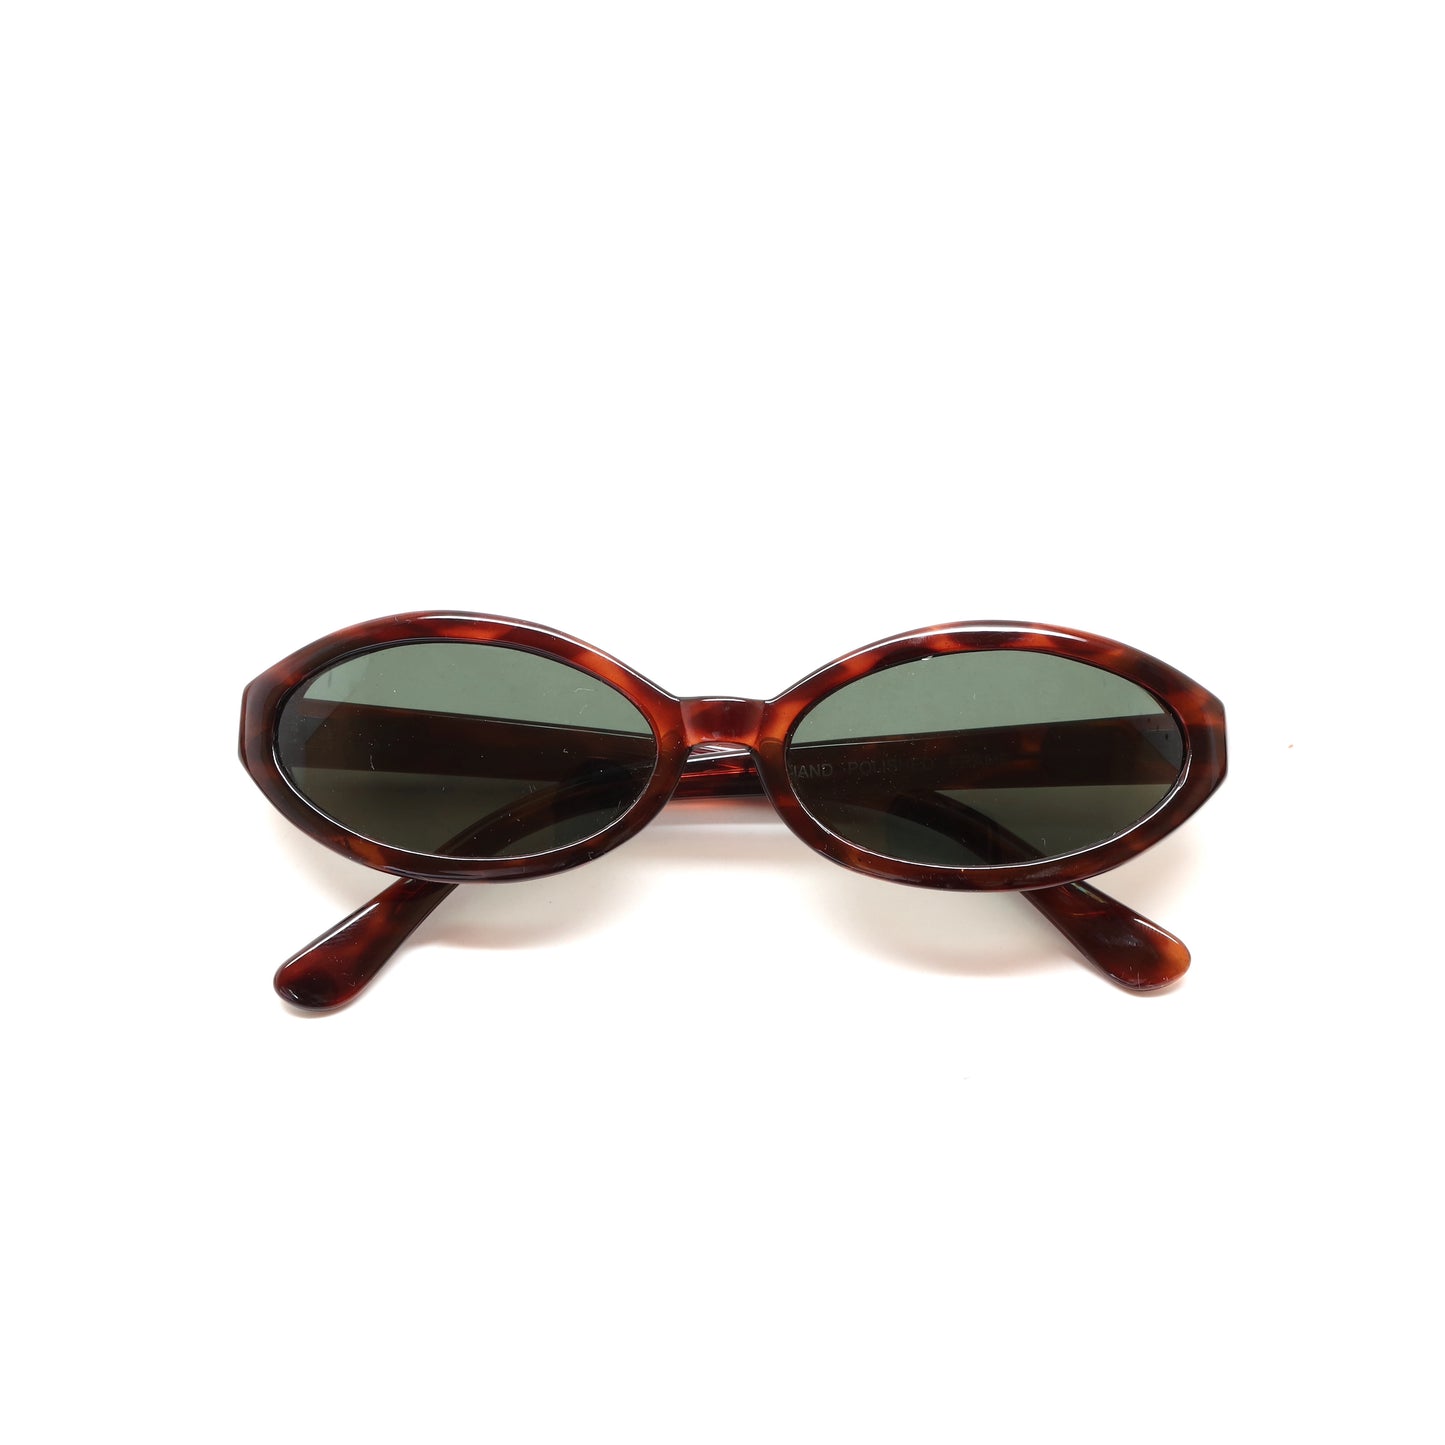 Deluxe Vintage 90s Deadstock High Quality Oval Sunglasses - Tortoise